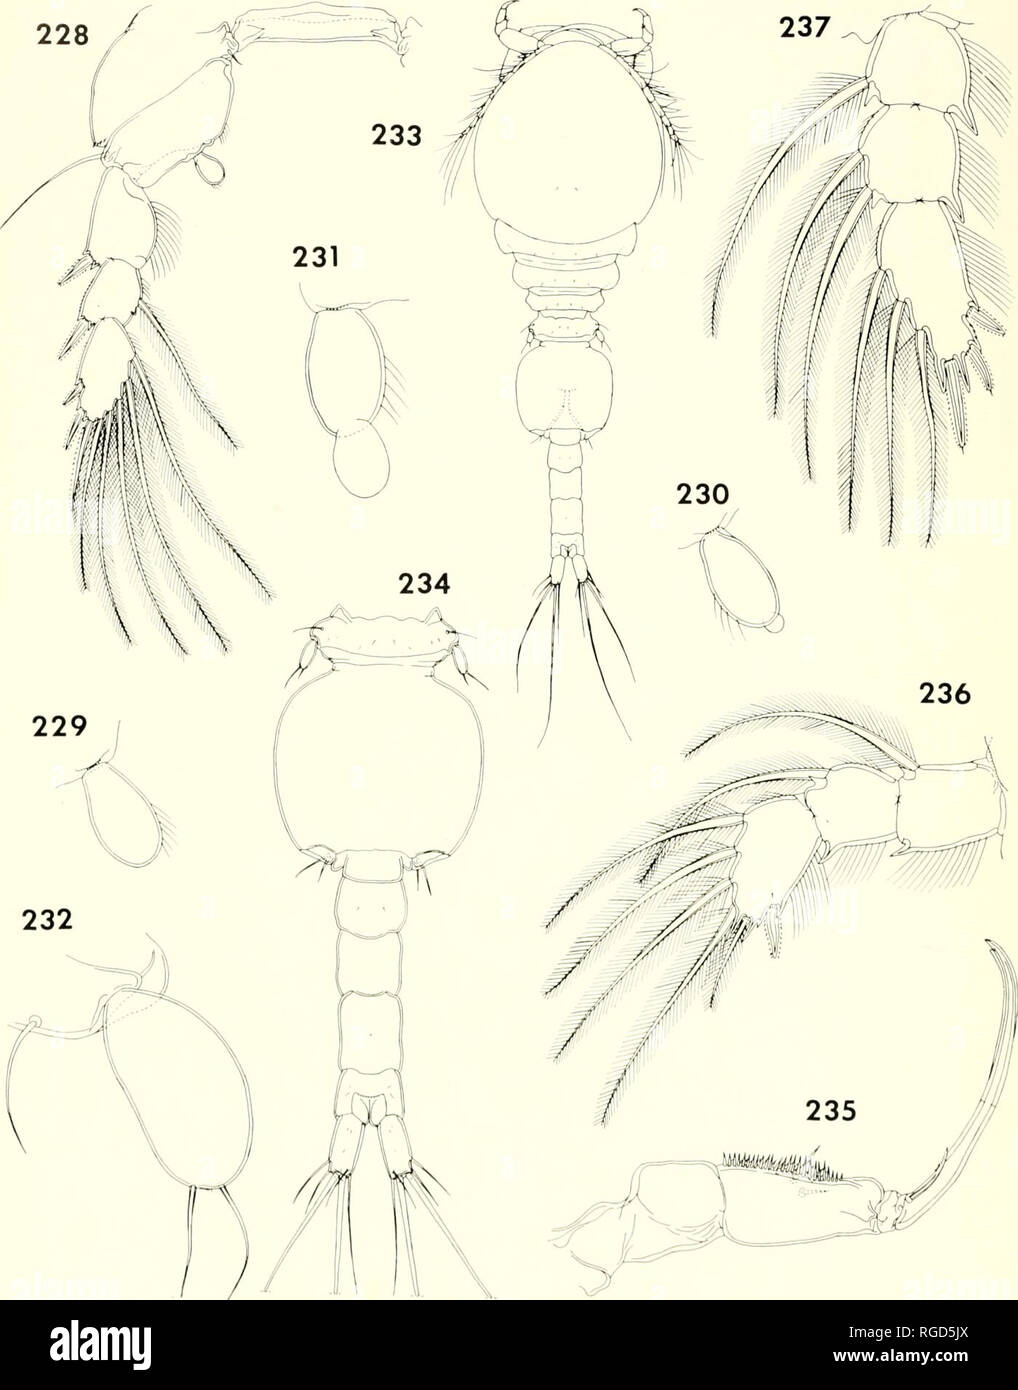 . Bulletin of the Museum of Comparative Zoology at Harvard College. Zoology. 410 Bulletin Museum of Comparative Zoology, Vol. 136, No. 10. Figures 228-232. Hoplomo/gus mon/iporae n. gen., n. sp., female (continued). 228, leg 4 and intercoxal plate, ante- rior (D); 229, endopod of leg 4, anterior |C); 230, endopod of leg 4, anterior (C); 231, endopod of leg 4, anterior (C); 232, leg 5, lateroventral (D). Figures 233-237. Hop/omo/gus mondporoe n. gen., n. sp., male. 233, body, dorsal (G); 234, urosome, dorsal (H); 235, maxilliped, inner (E); 236, endopod of leg 1, anterior |F); 237, endopod of l Stock Photo